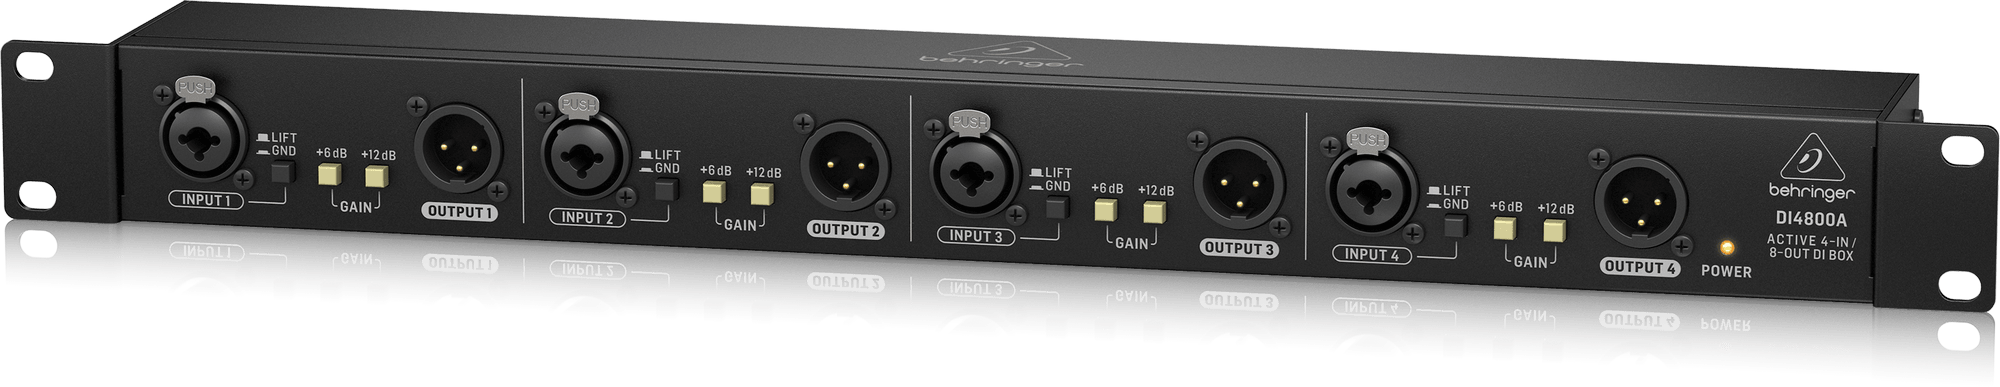 Behringer DI4800A Professional 4 Channel Active DI-Box, Booster and Line Isolator | BEHRINGER , Zoso Music